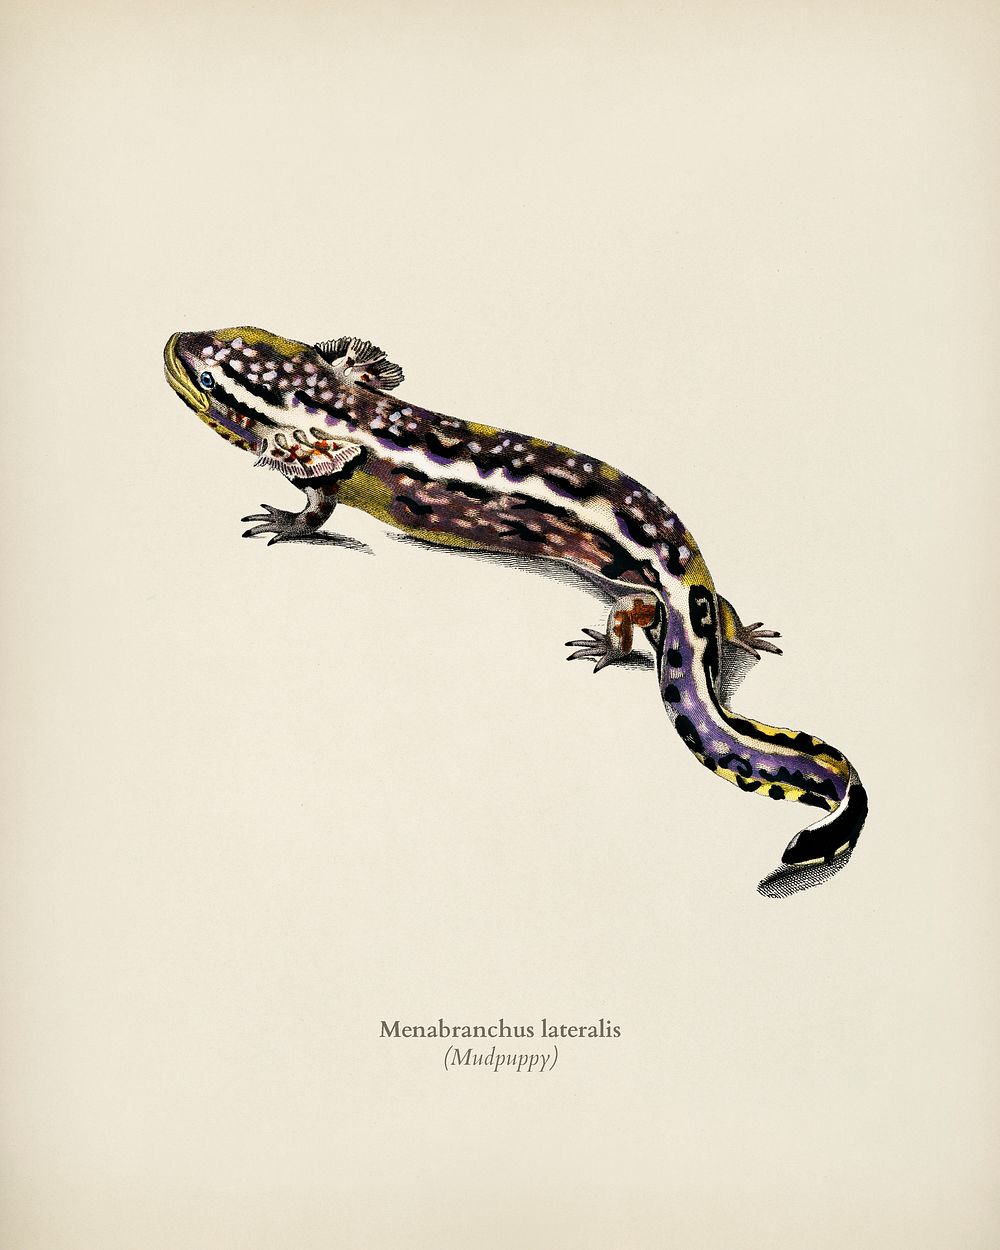 Mudpuppy (Menabranchus lateralis) illustrated by Charles Dessalines D' Orbigny (1806-1876). Digitally enhanced from our own…